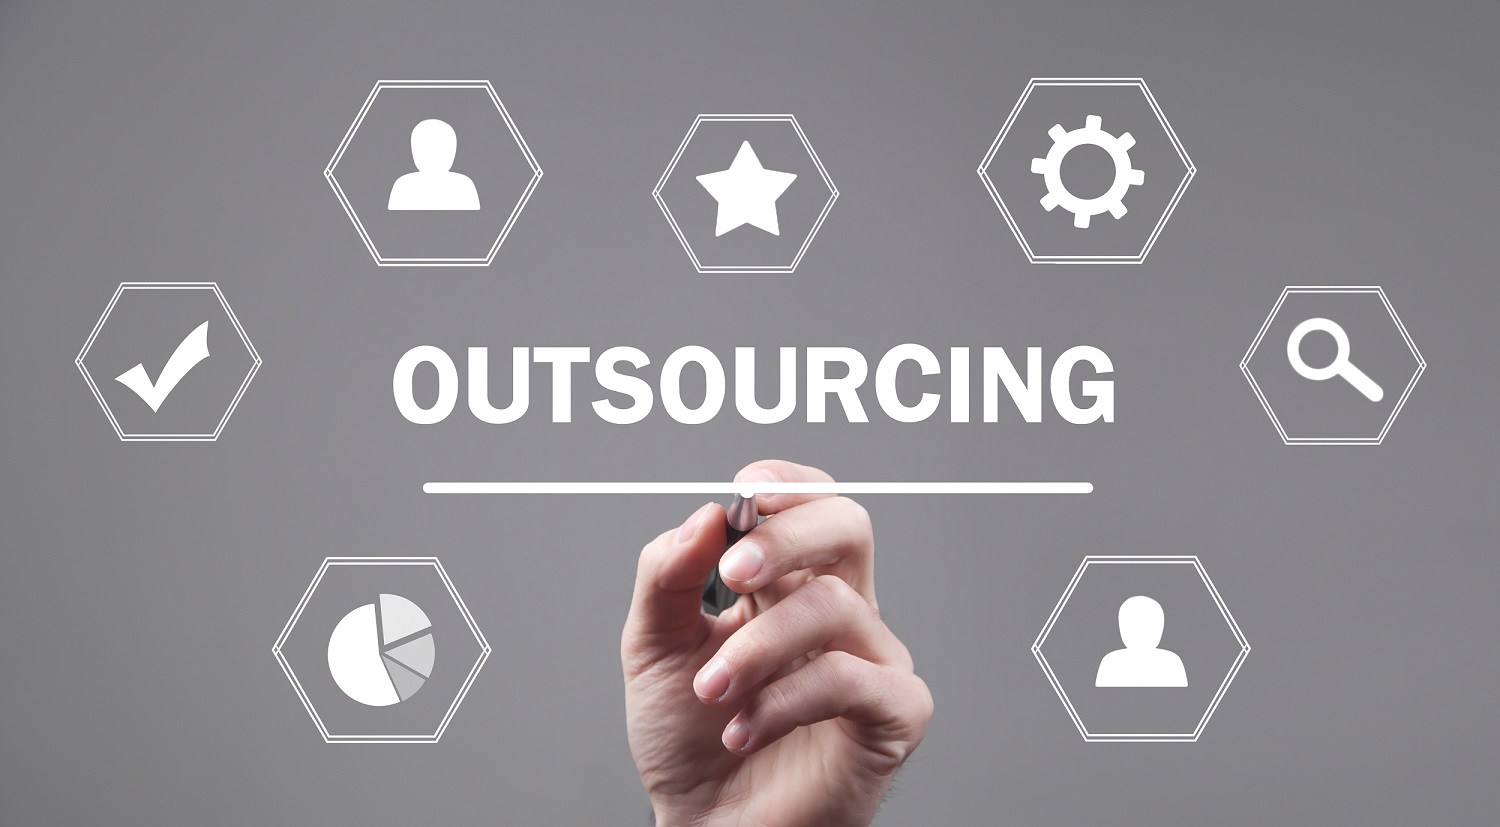 Male hand writing in screen. Outsourcing. The image is trying to depict payroll outsourcing services.